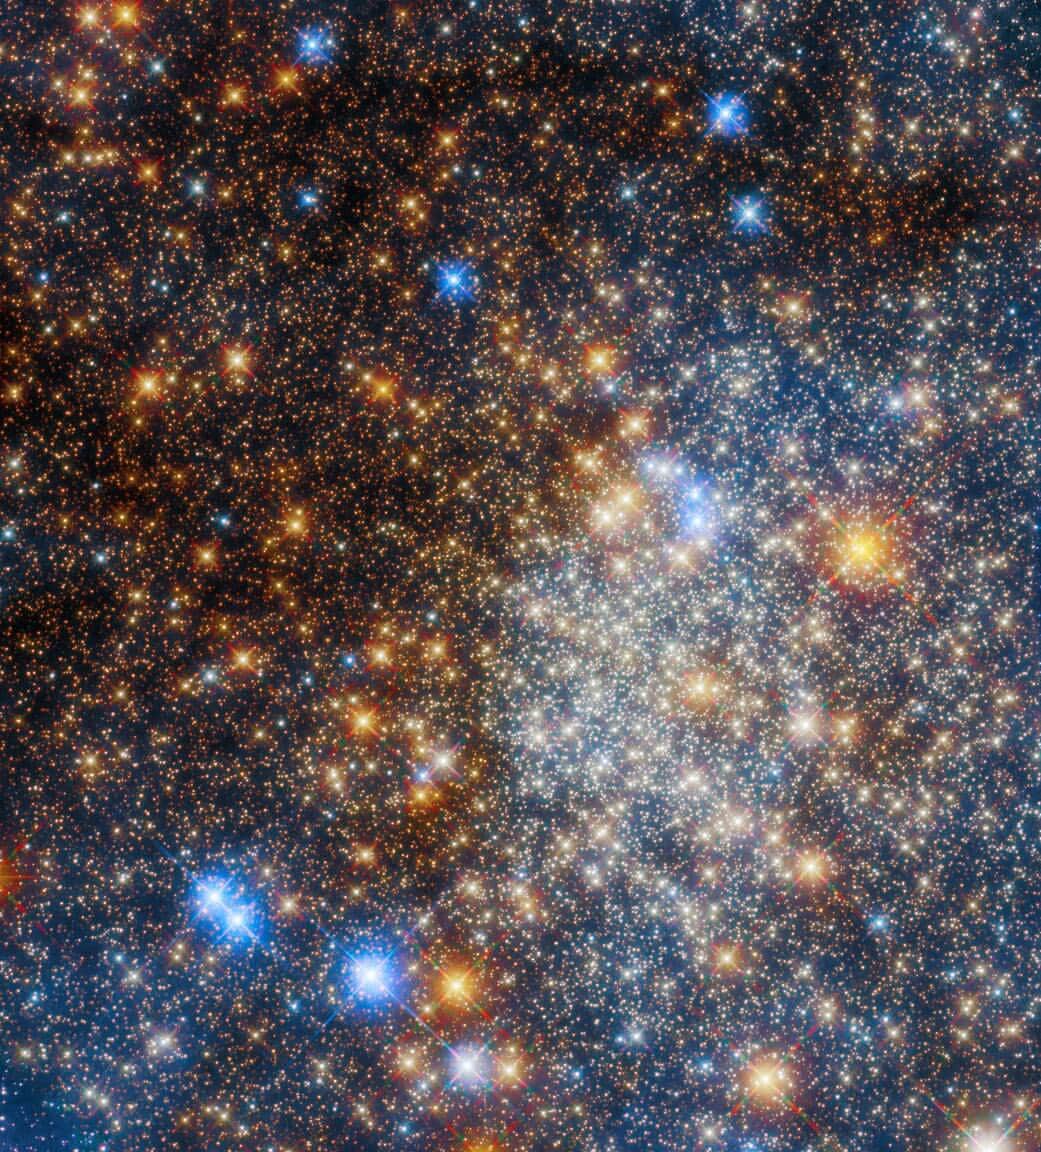 NASAのインスタグラム：「This @NASAHubble image just sparkles, doesn’t it? ✨   This is a globular star cluster located deep in the Milky Way. The dust in space affects how we see the different colors in the image. Mottled dust clouds make parts of the cluster look redder.   Image Description: The frame is completely filled with bright stars, ranging from tiny dots to large, shining stars with prominent spikes. In the lower-right the stars come together in the core of the star cluster, making the brightest and densest area of the image. The background varies from darker and warmer in color, to brighter and paler where there are more stars.   #Hubble #NASA #Space #Star」